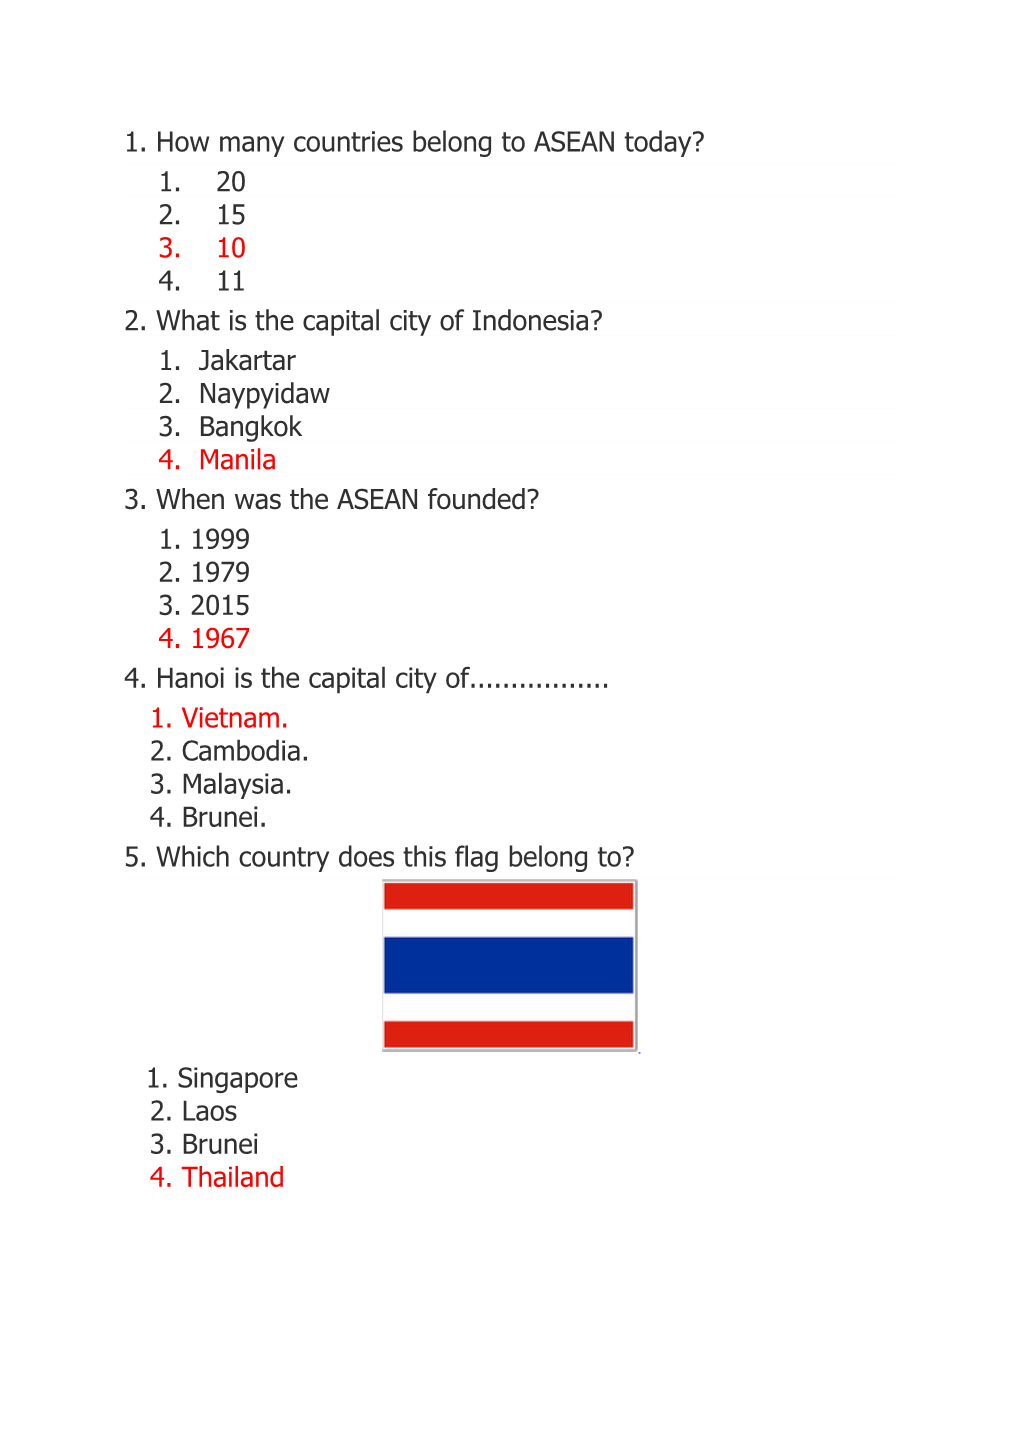 1. How Many Countries Belong to ASEAN Today?